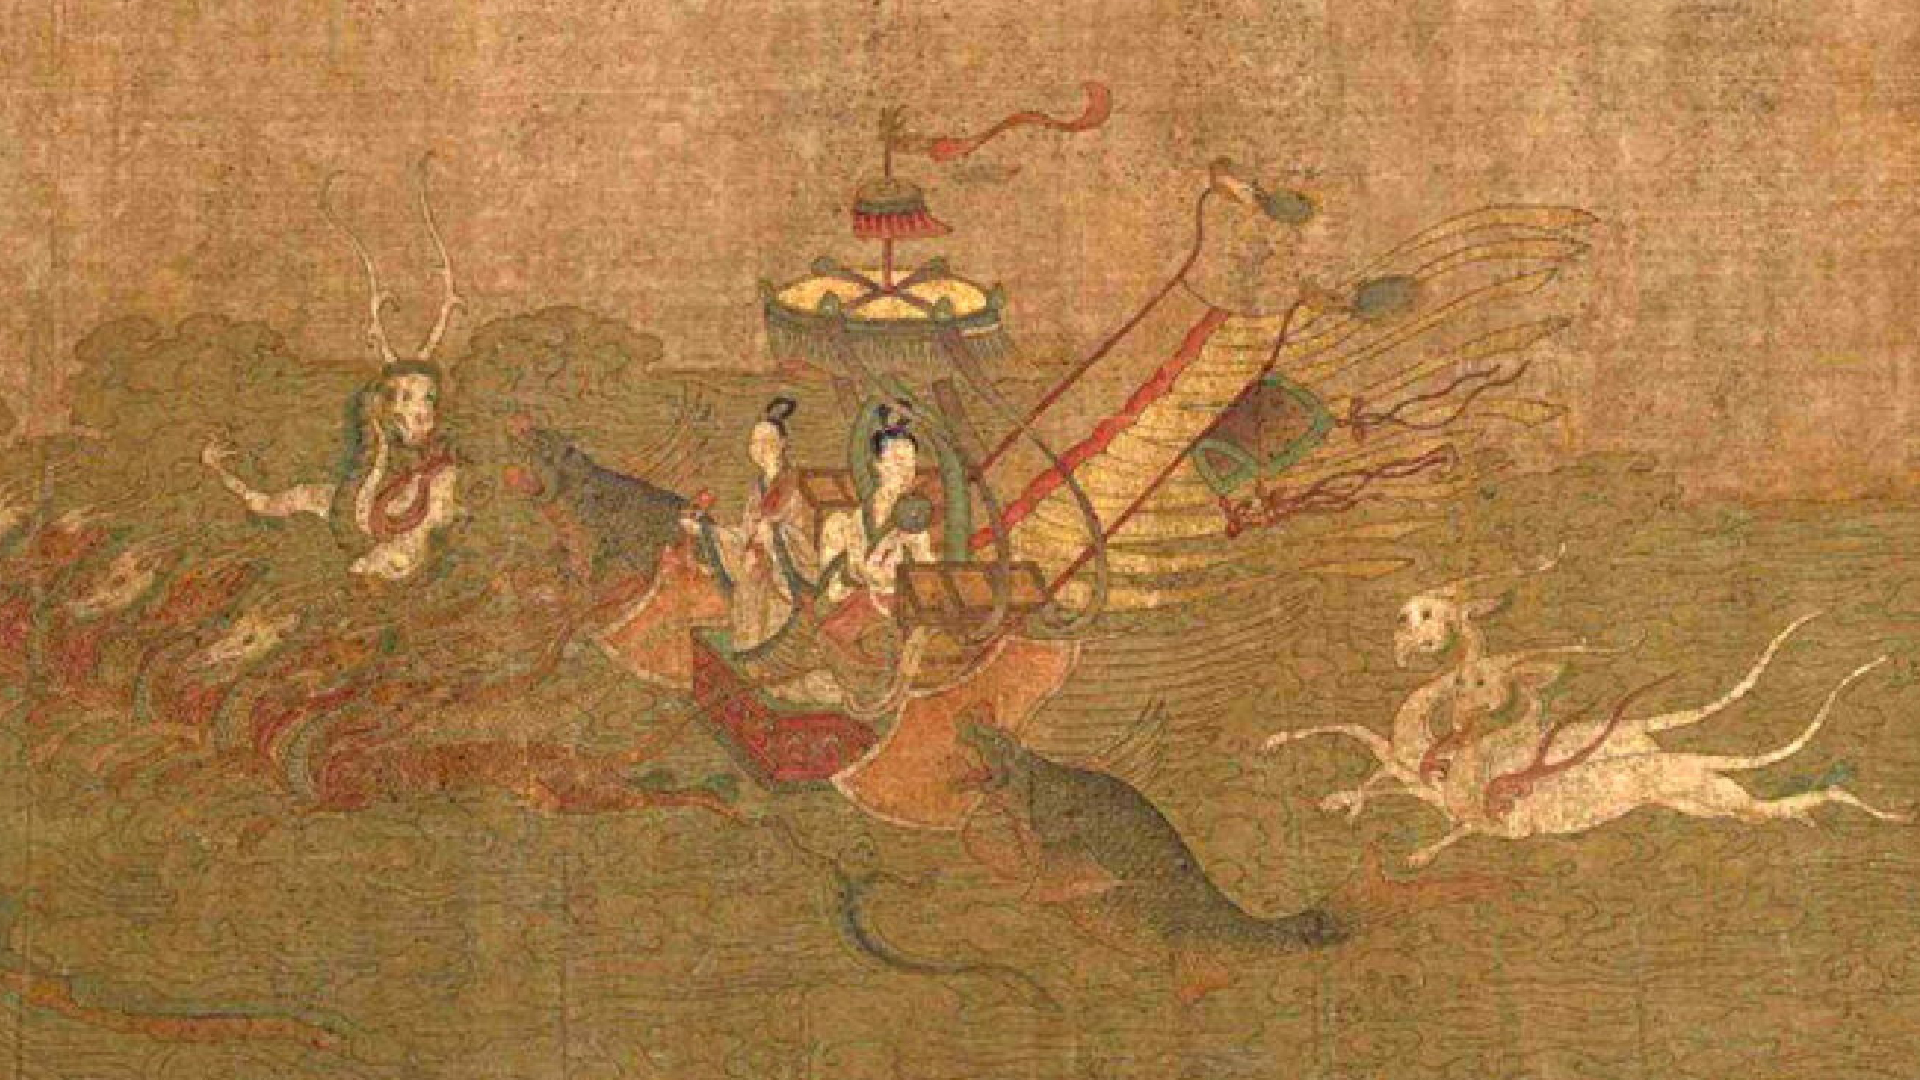 The Nymph of the Luo River by Gu Kaizhi – 1000 CE-100